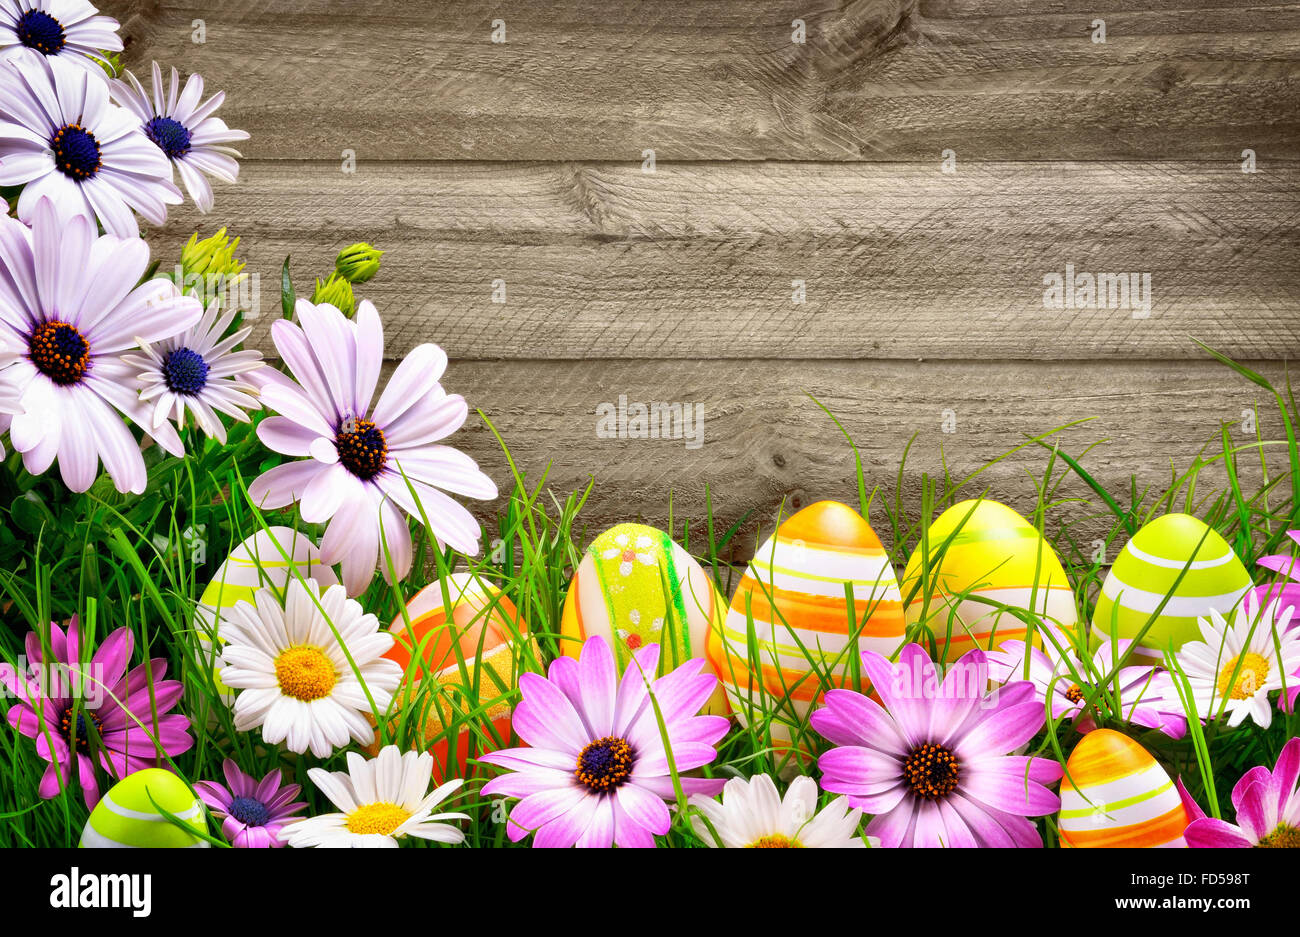 Spring flowers and happy colorful Easter eggs with rustic wood planks in the background Stock Photo